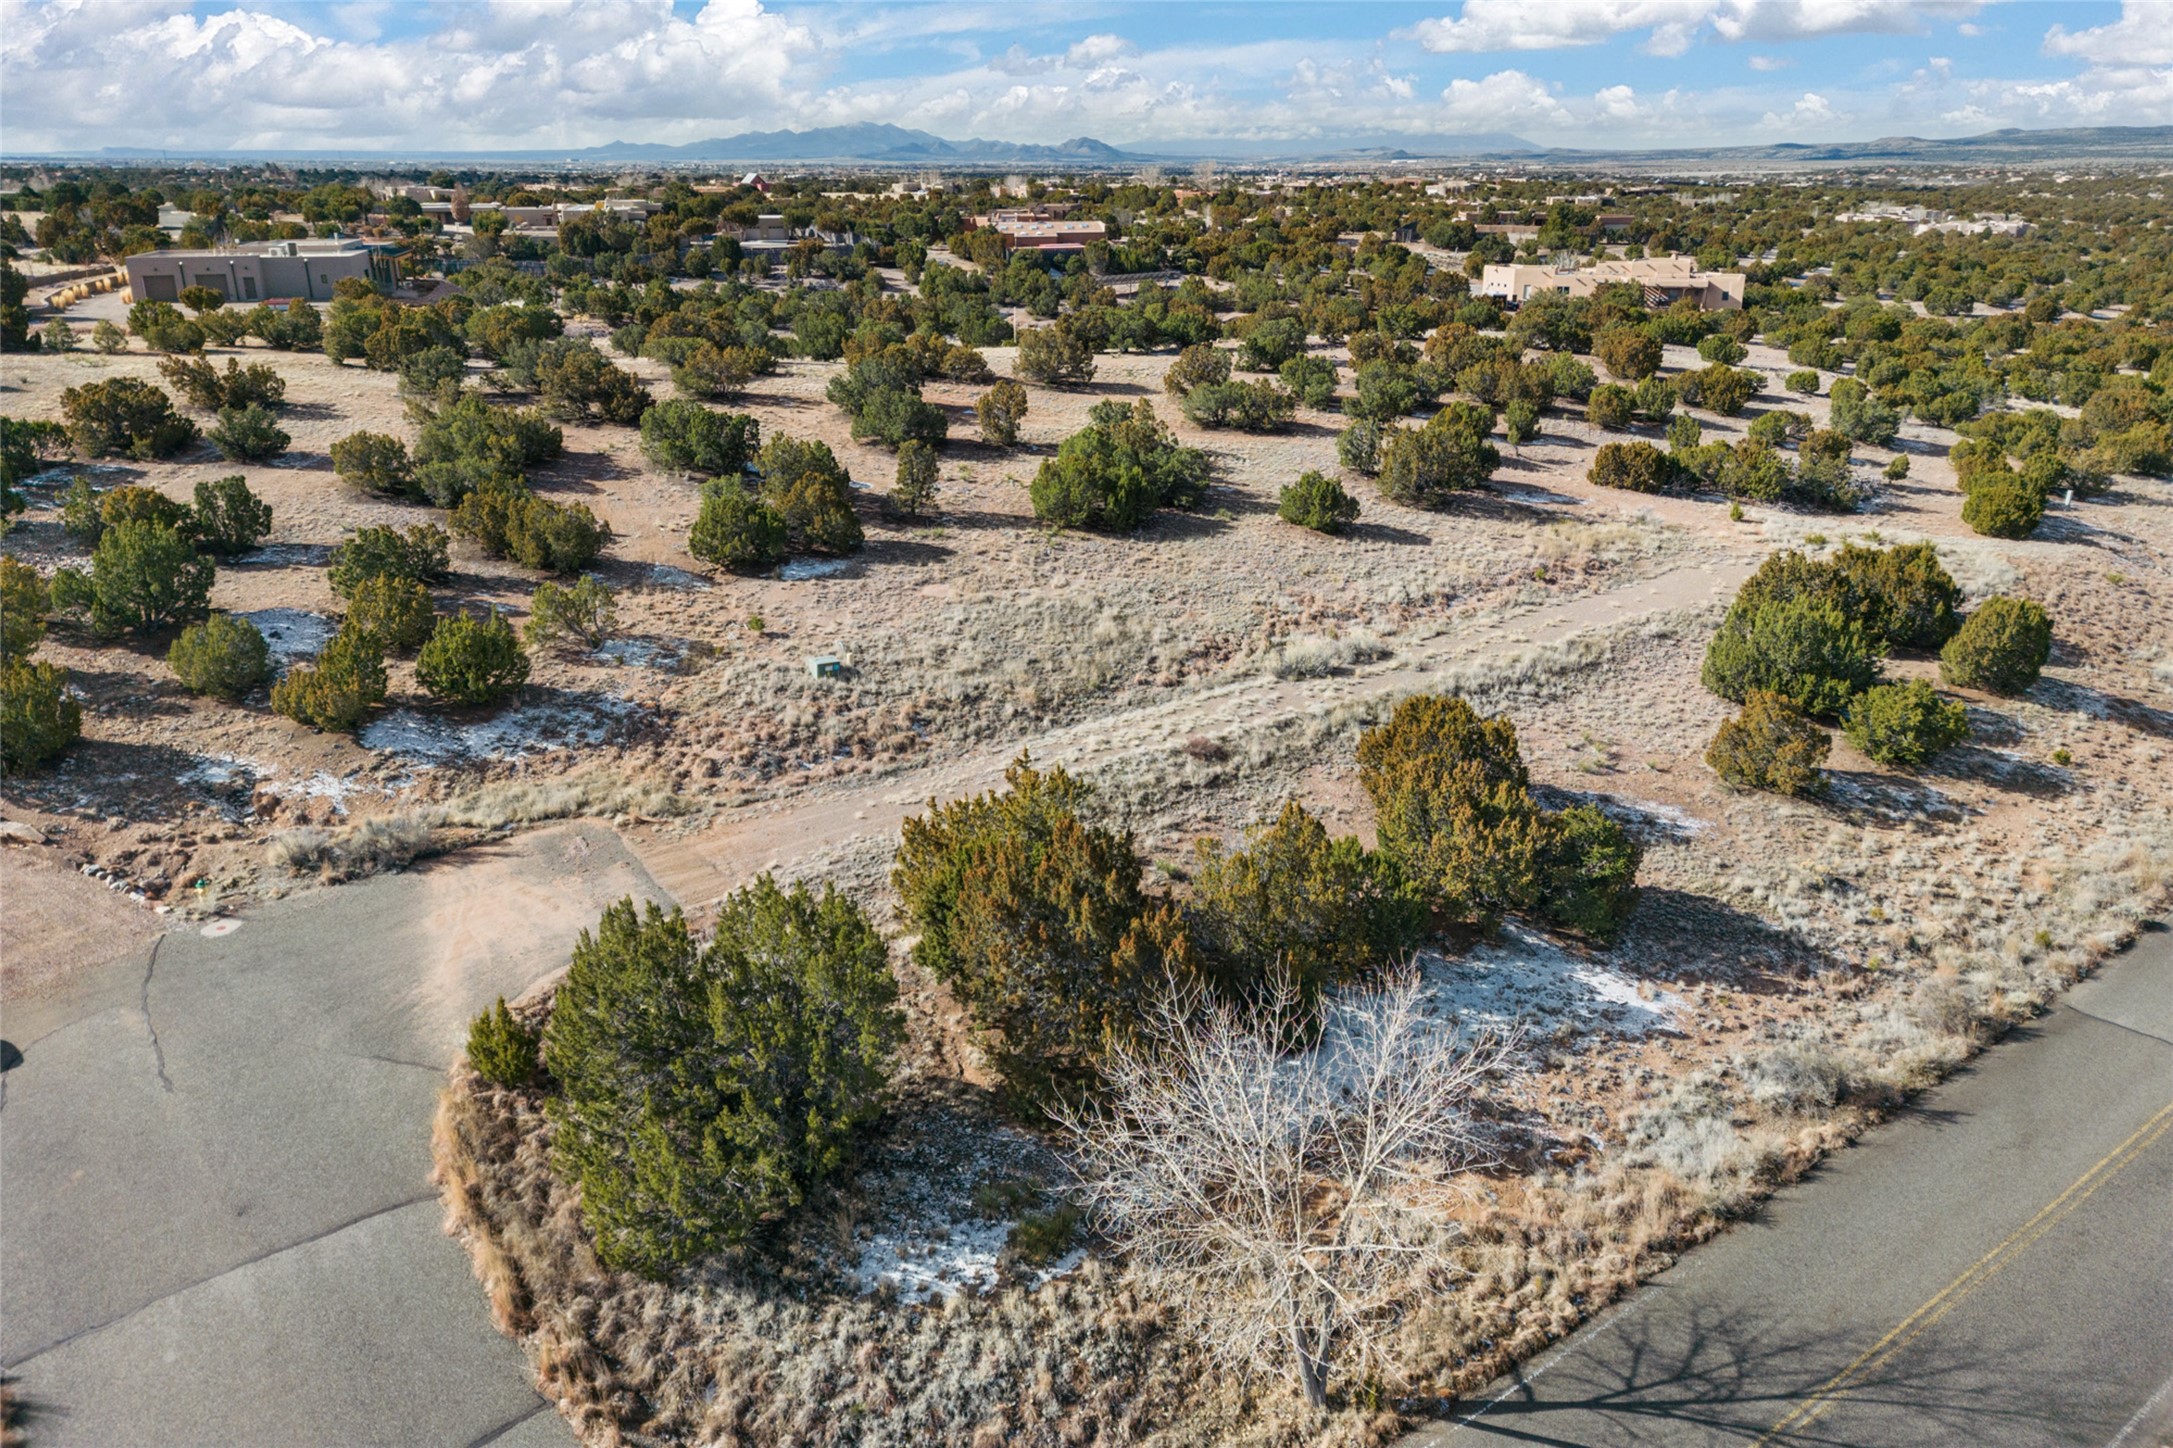 The driveway from the Cul-de-sac for Lot 21; 1 La Vida Court with views to the Sandia Mountain